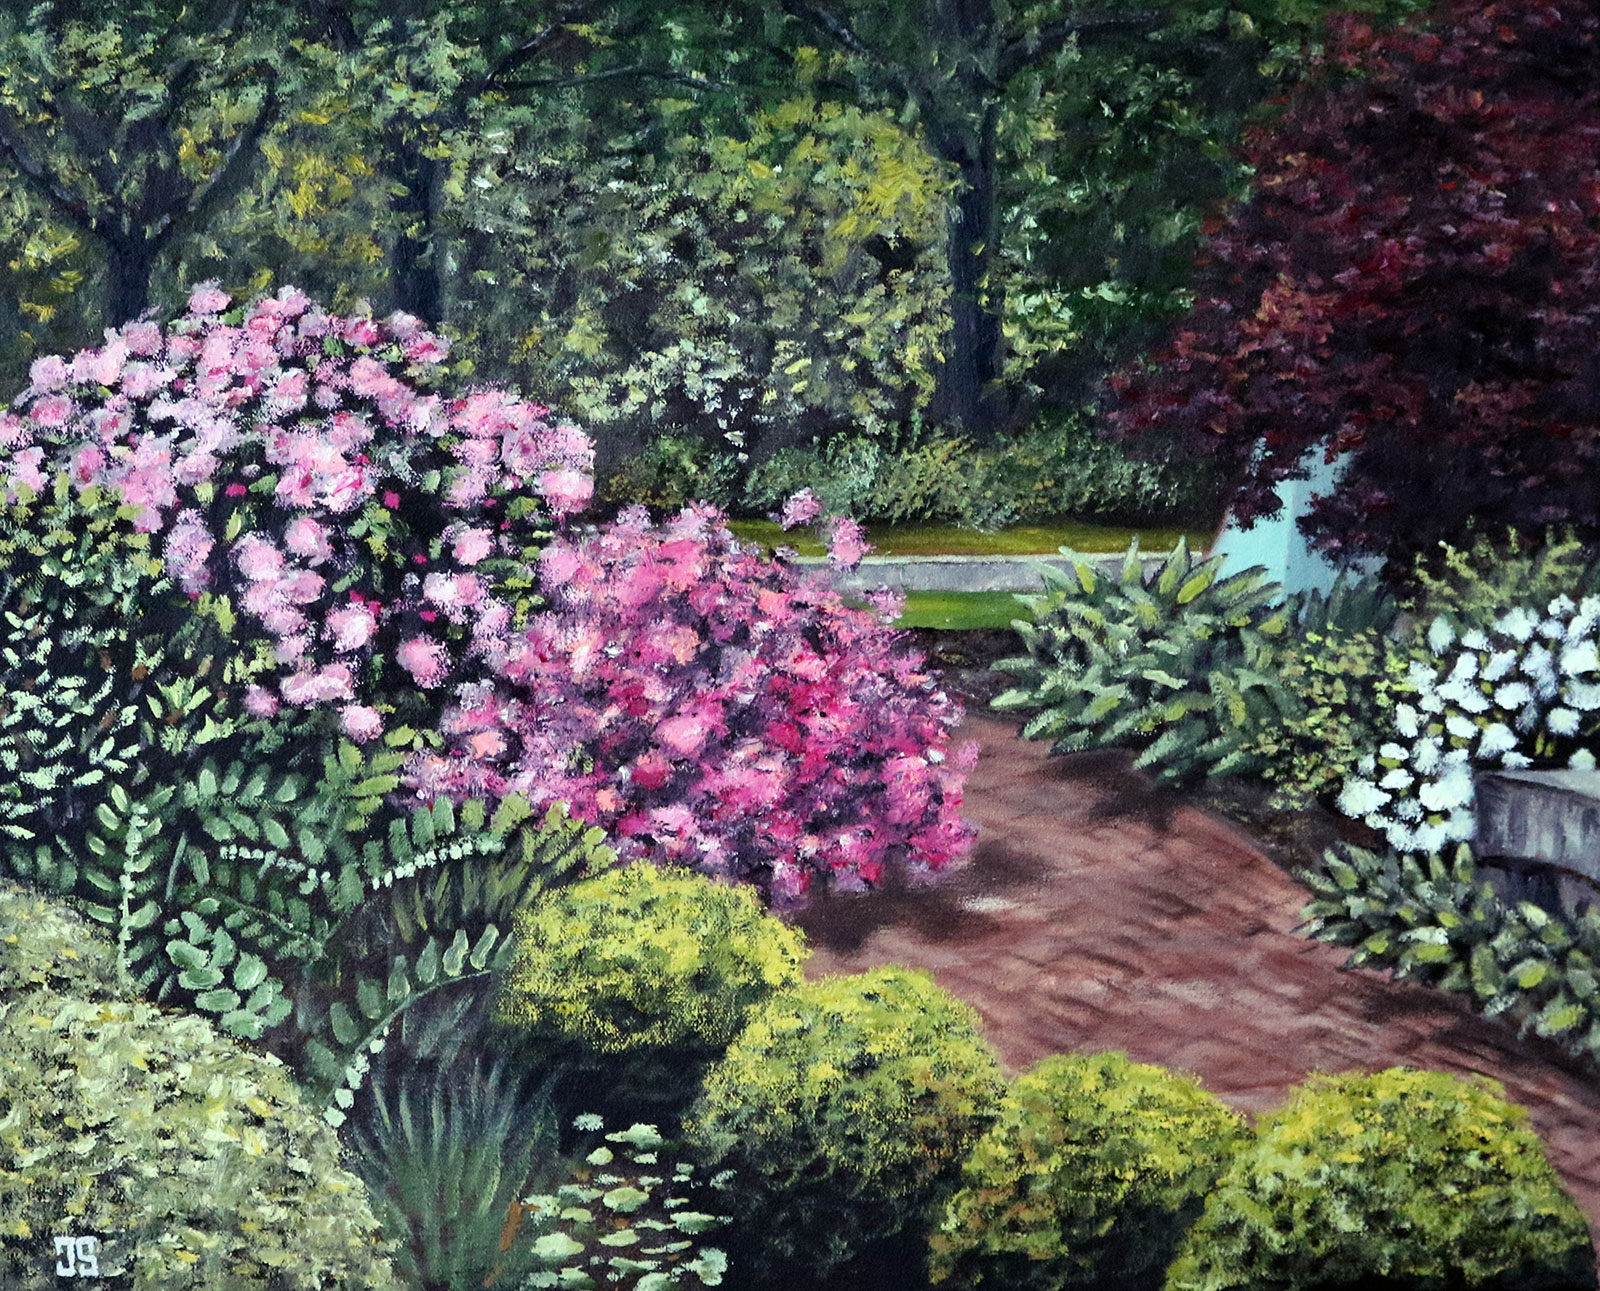 Oil painting "Cape Cod Museum of Art Gardens" by Jeffrey Dale Starr